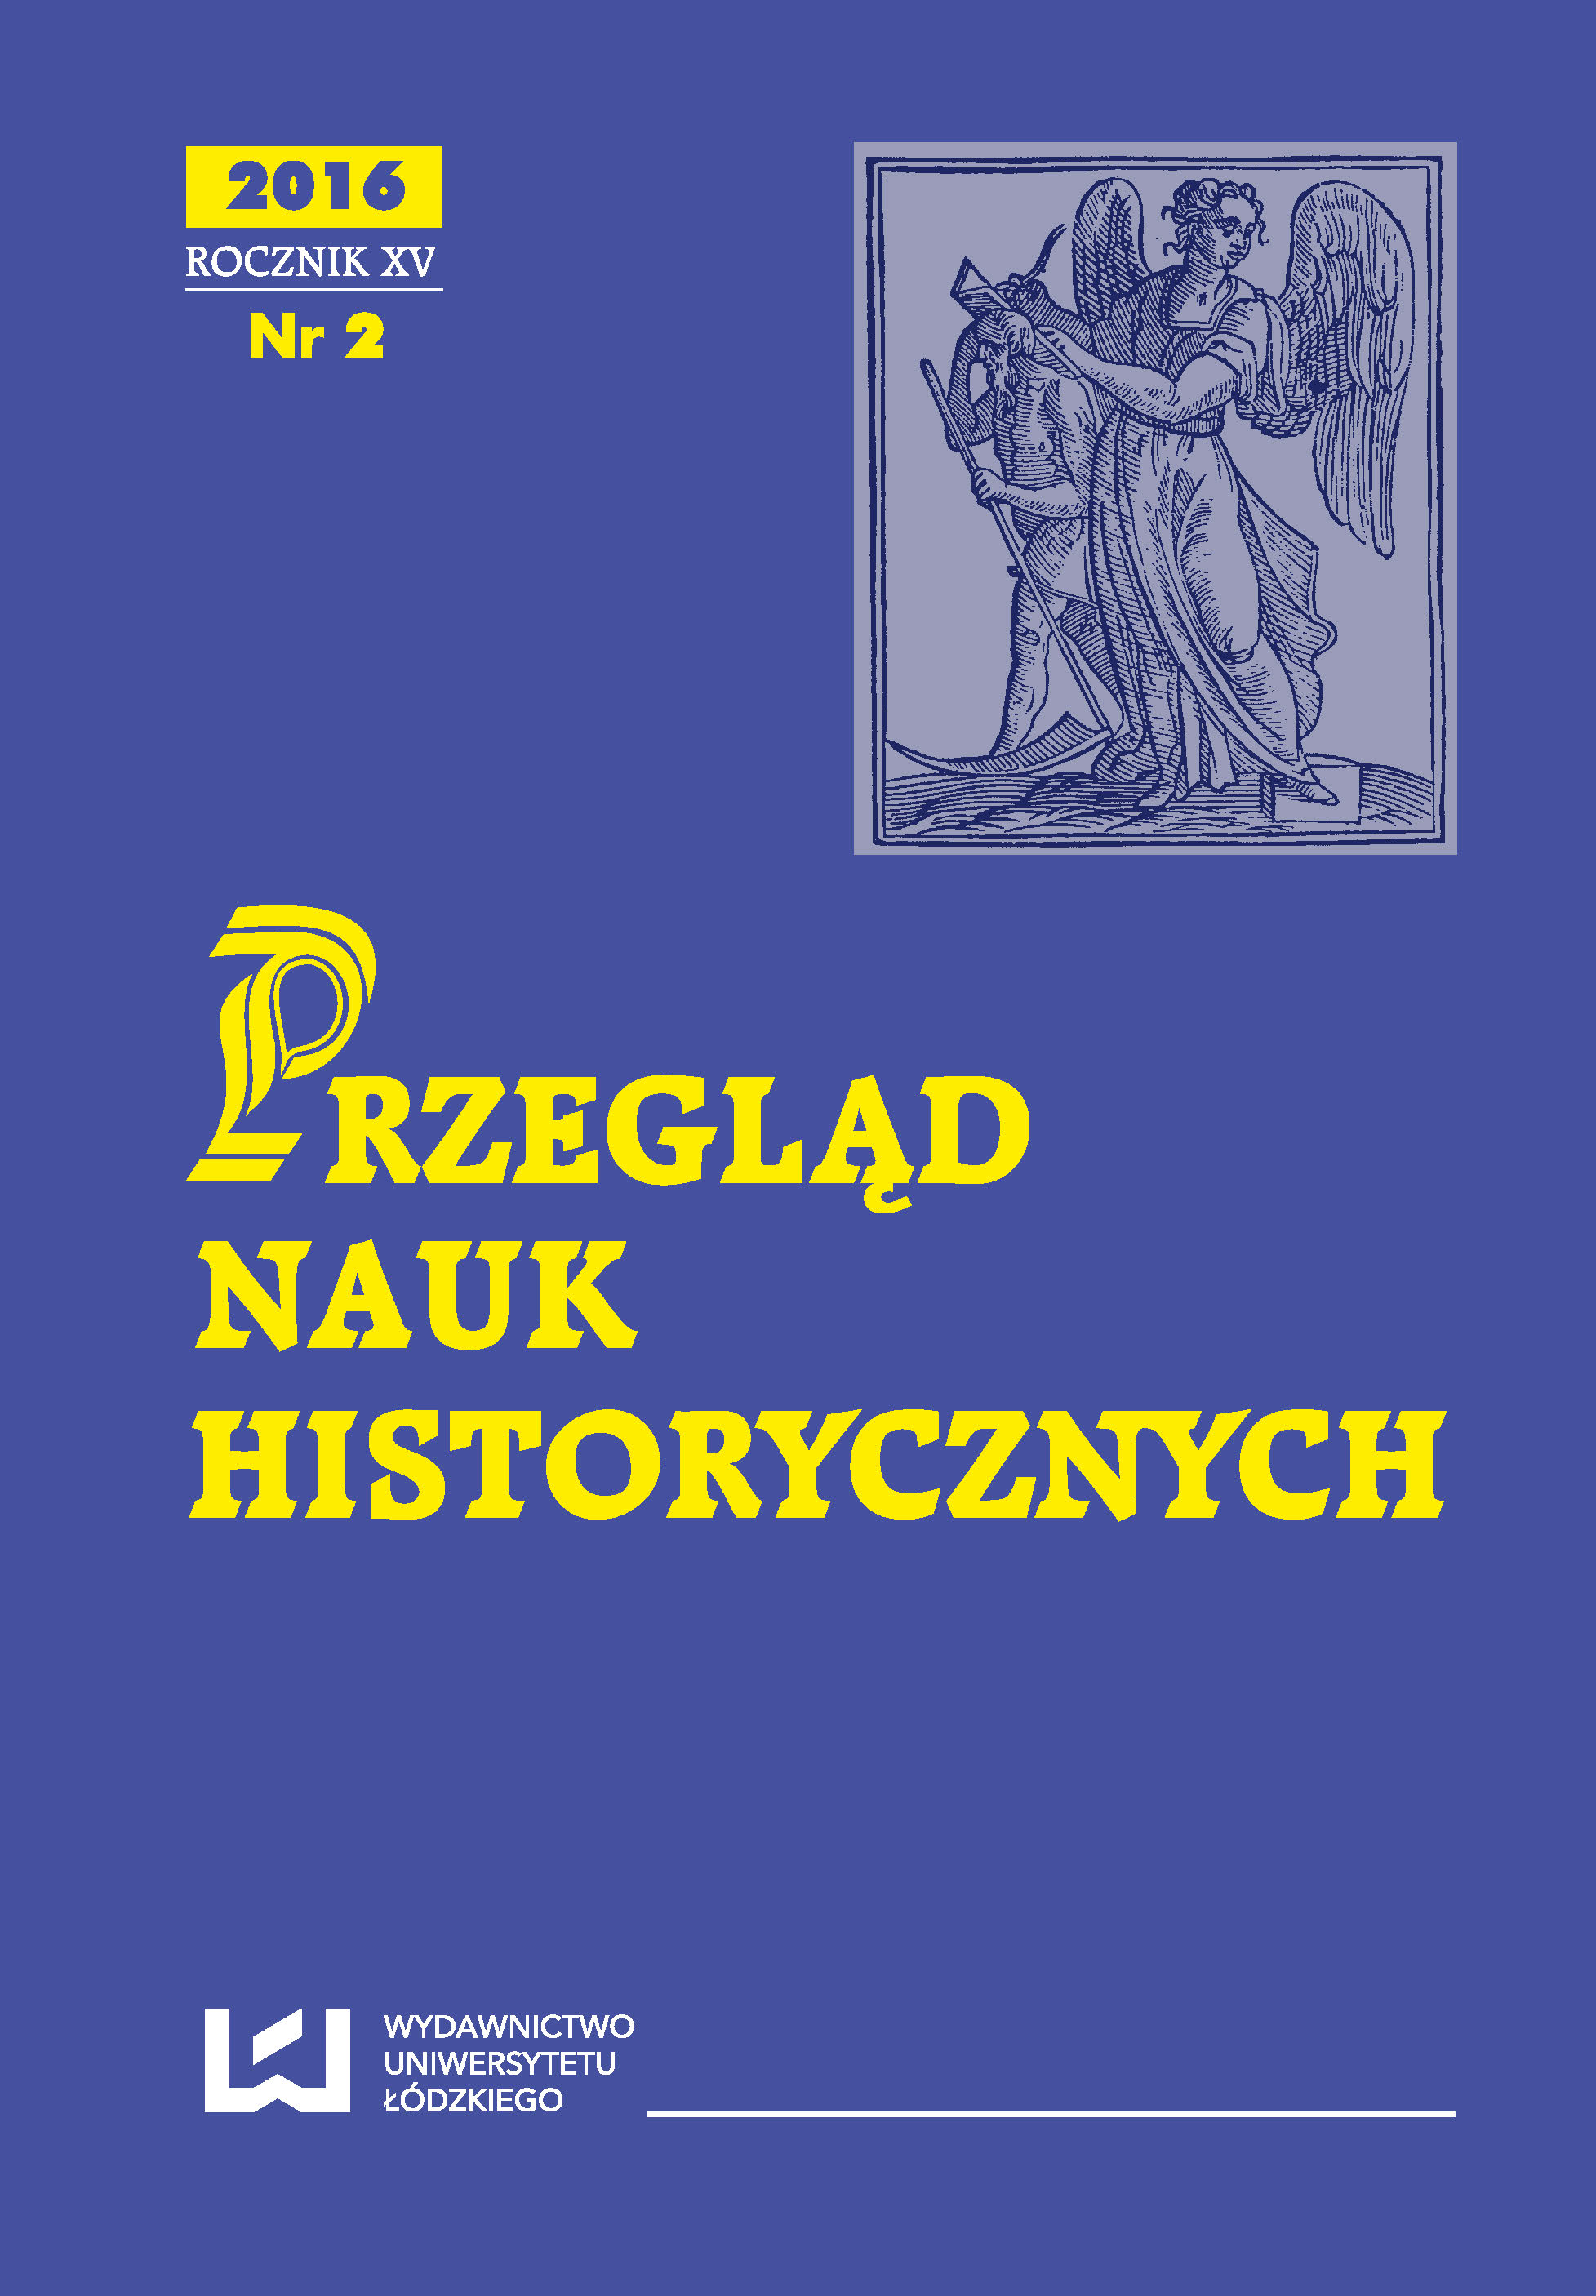 Parties and factions in the final period of the rule of king Augustus III Cover Image